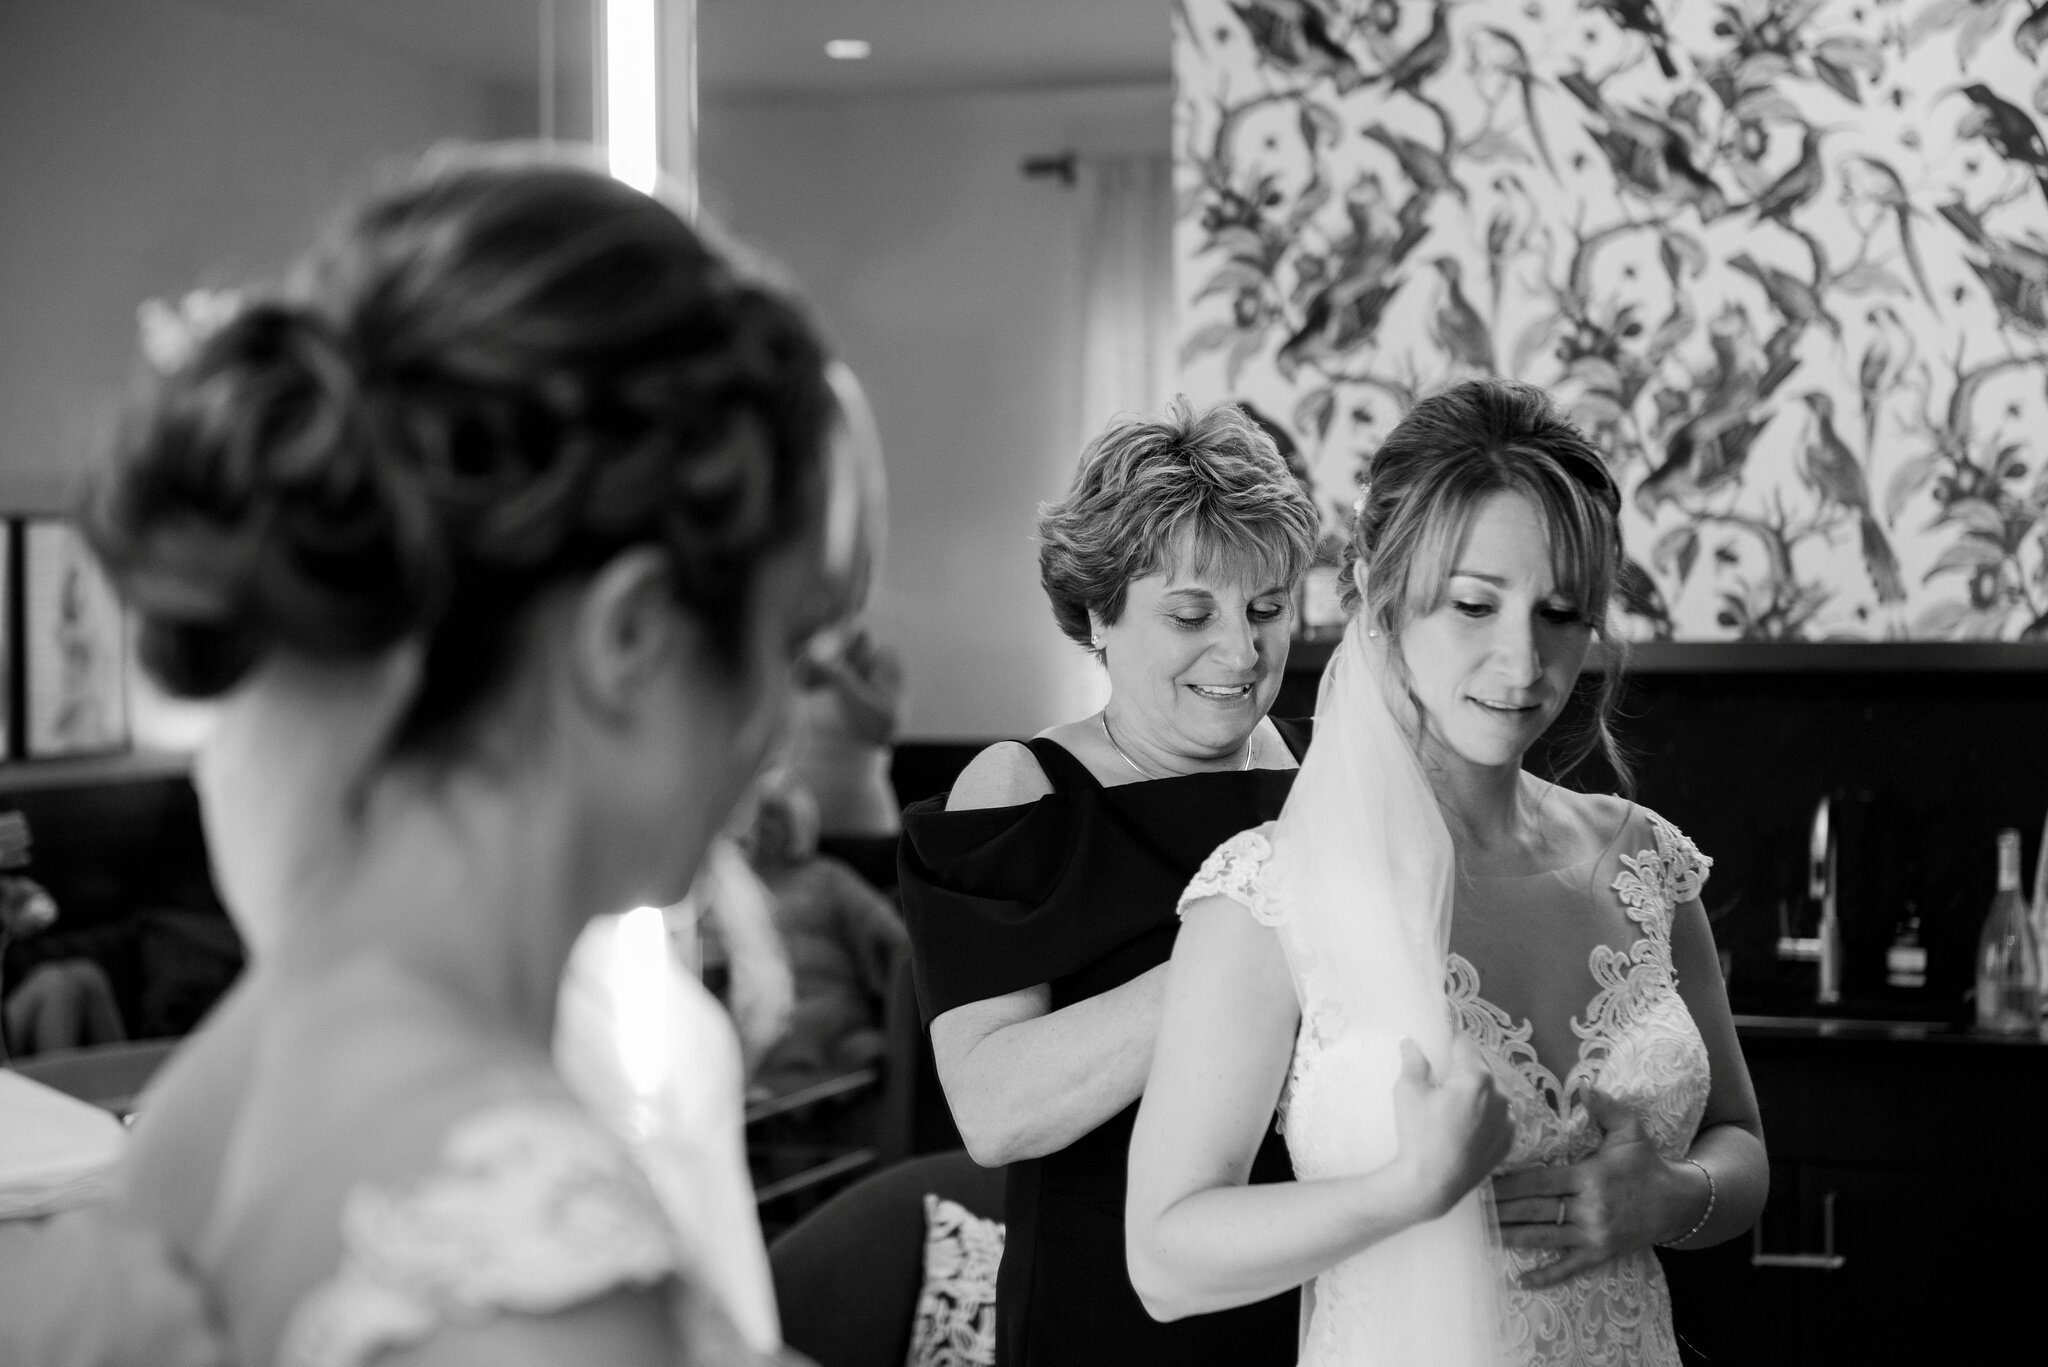 Candid getting ready moment at wedding